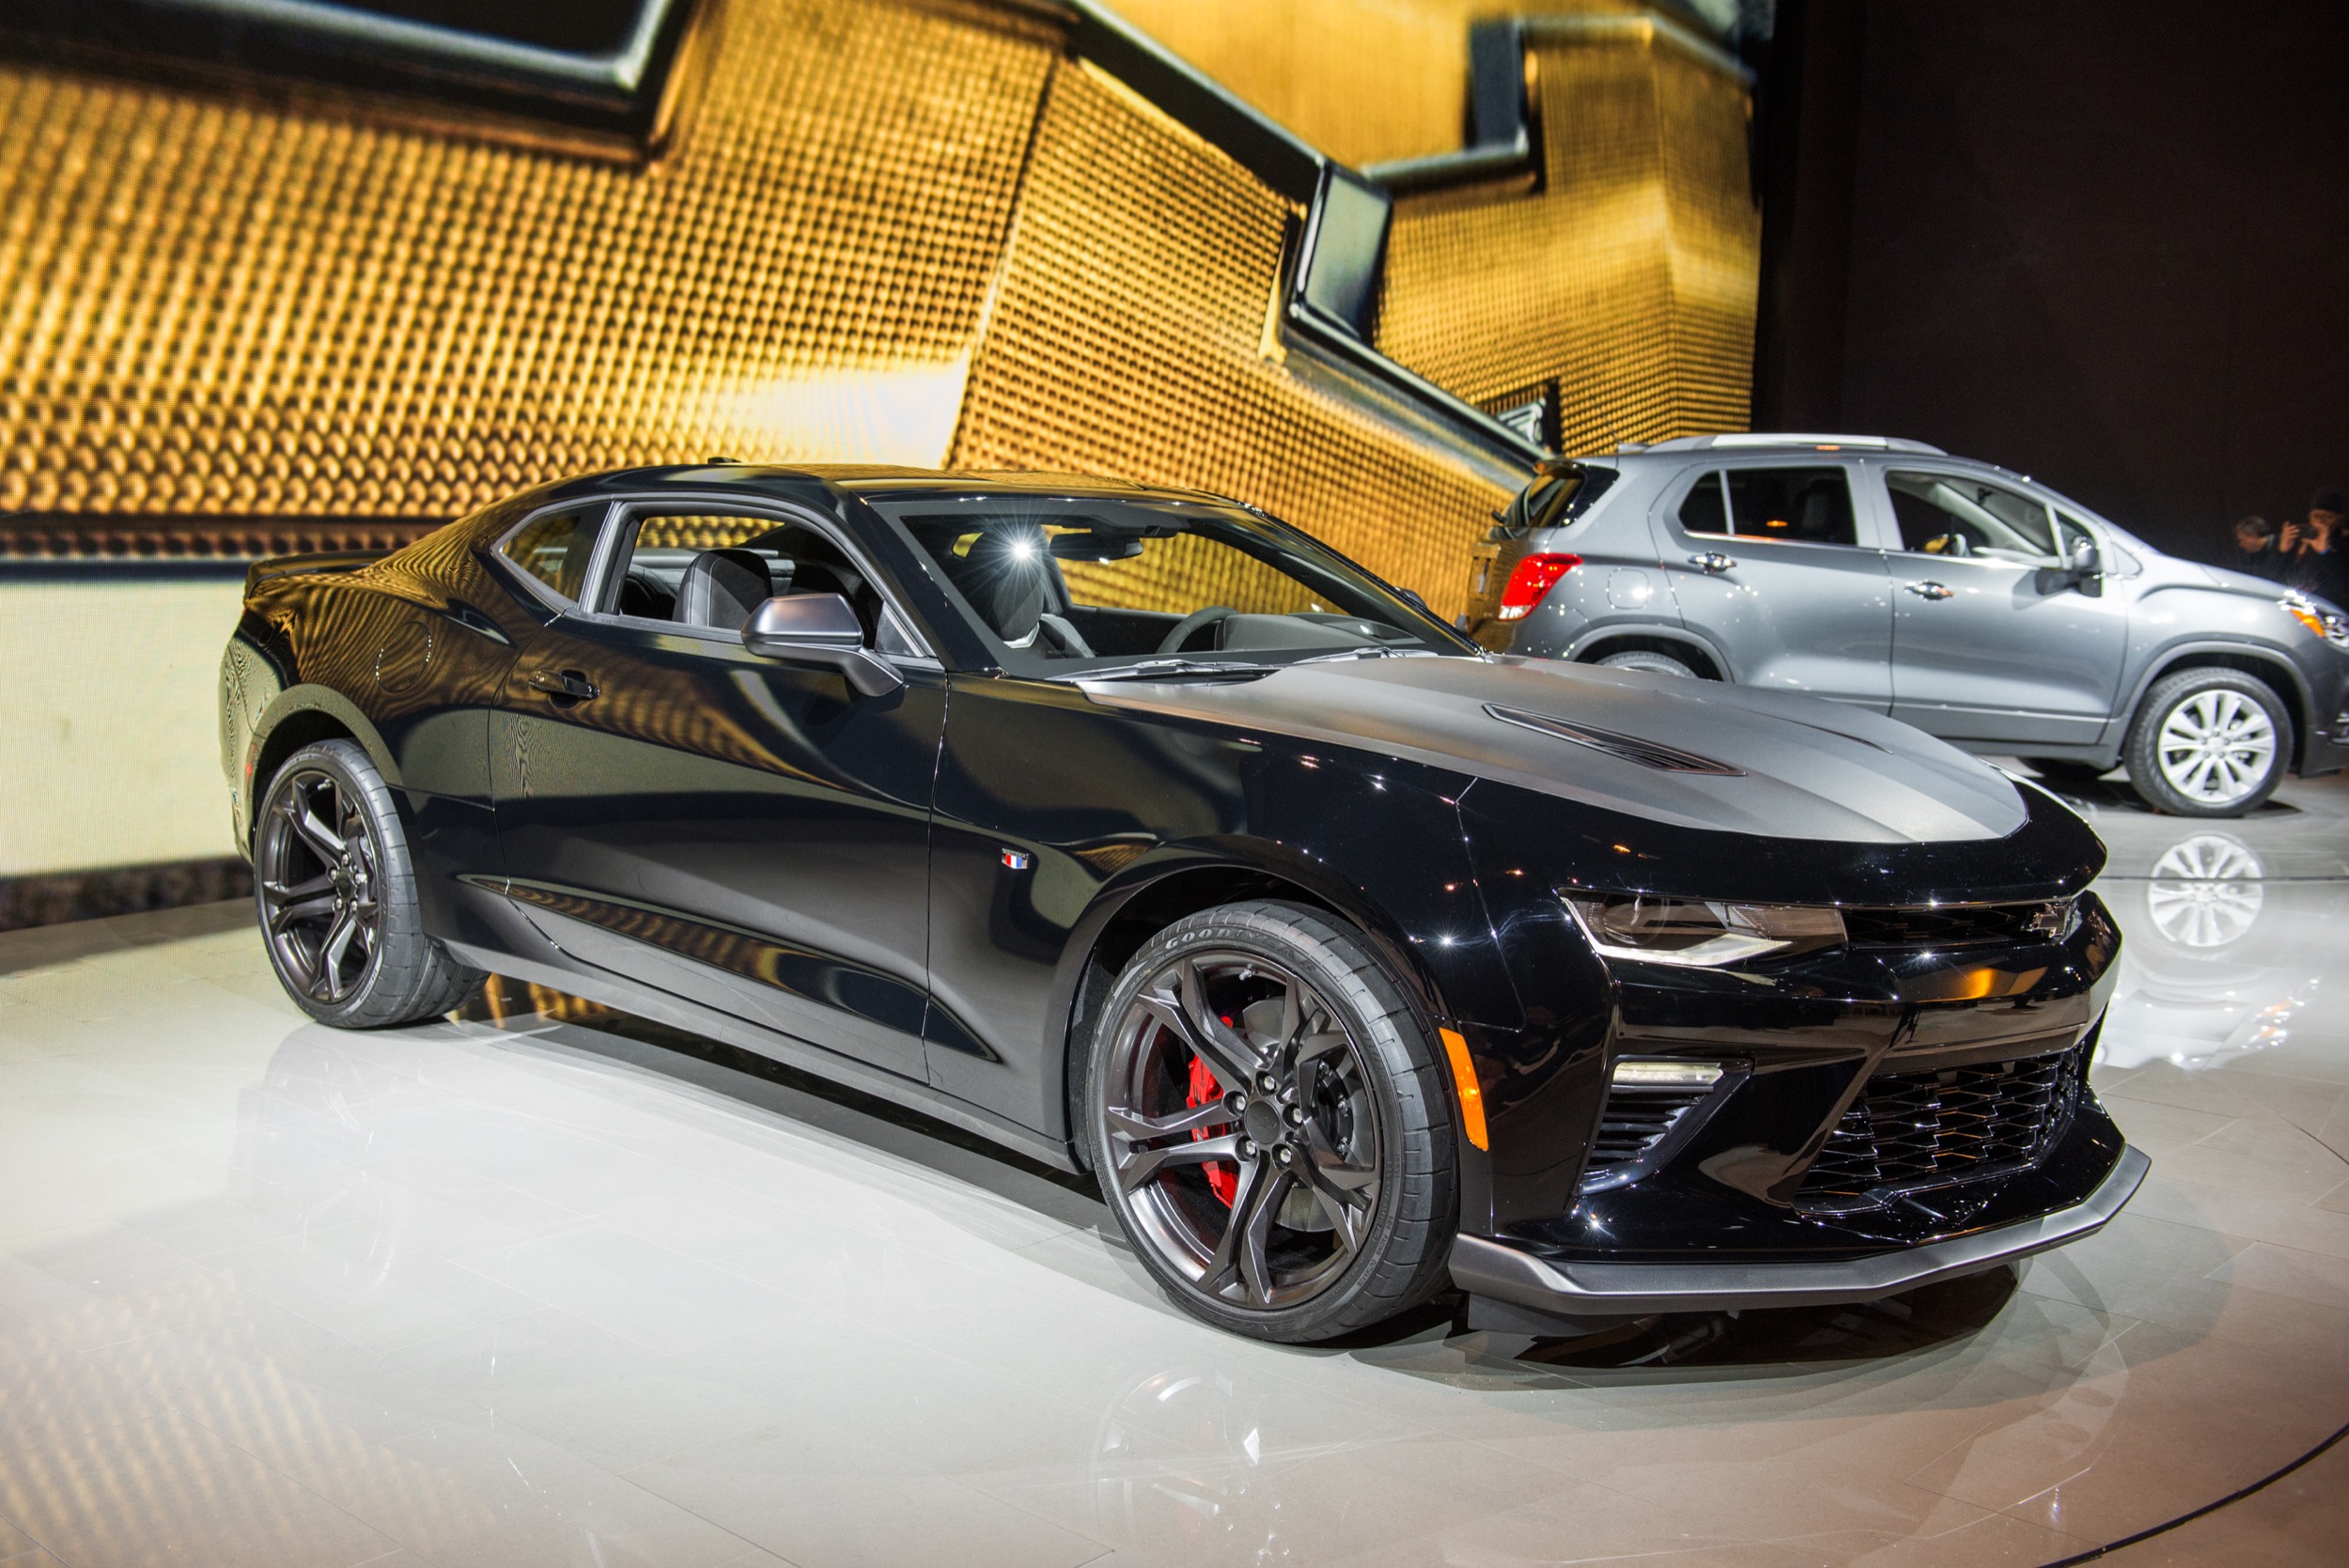 Comparing The 2017 Chevy Camaro V6 1LE To Its V8-Powered Brother | GM  Authority